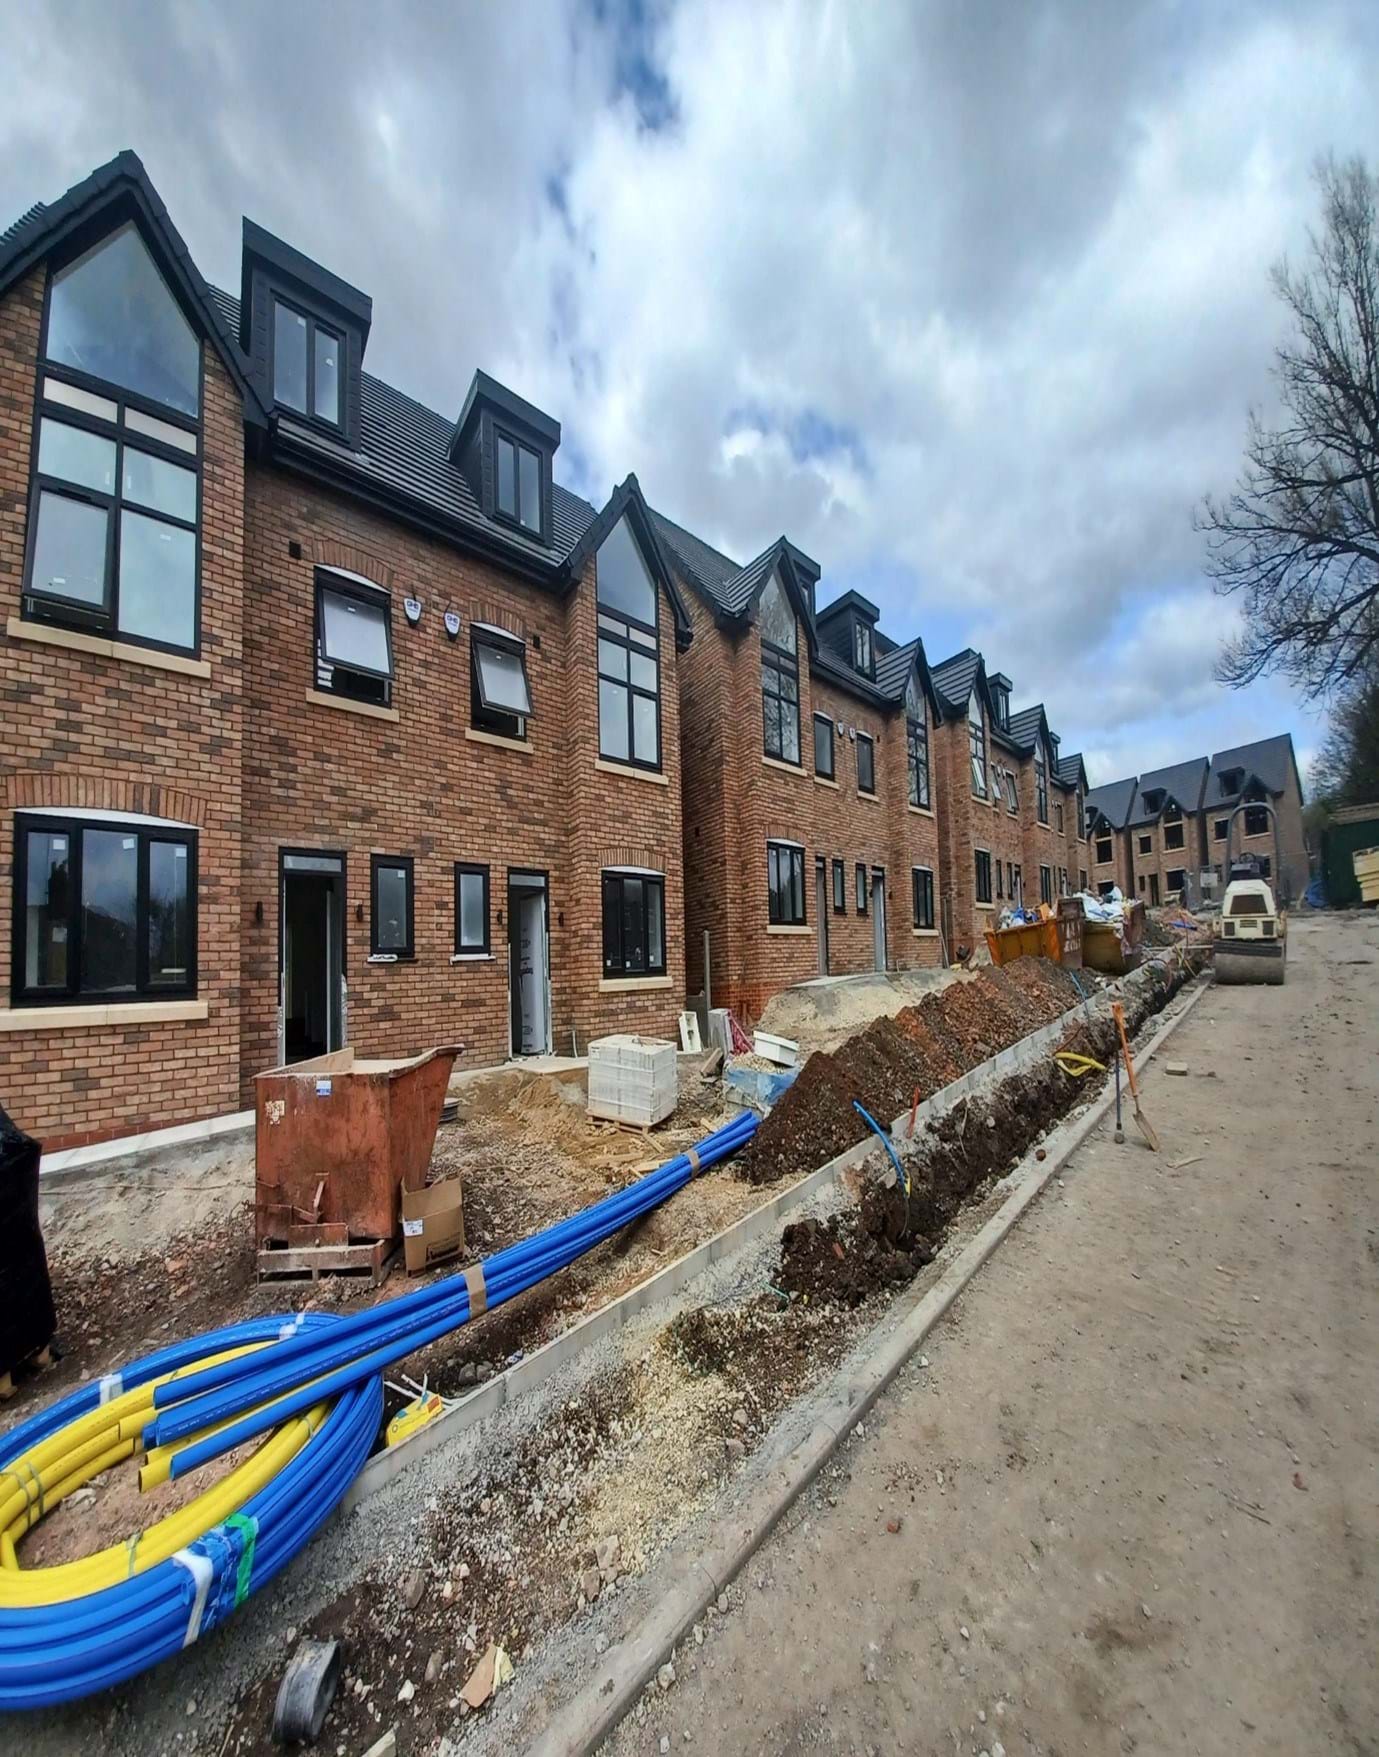 We are working with KMM homes to deliver eight high quality, energy efficient new homes for shared ownership. at Ridge Hill in Stalybridge.